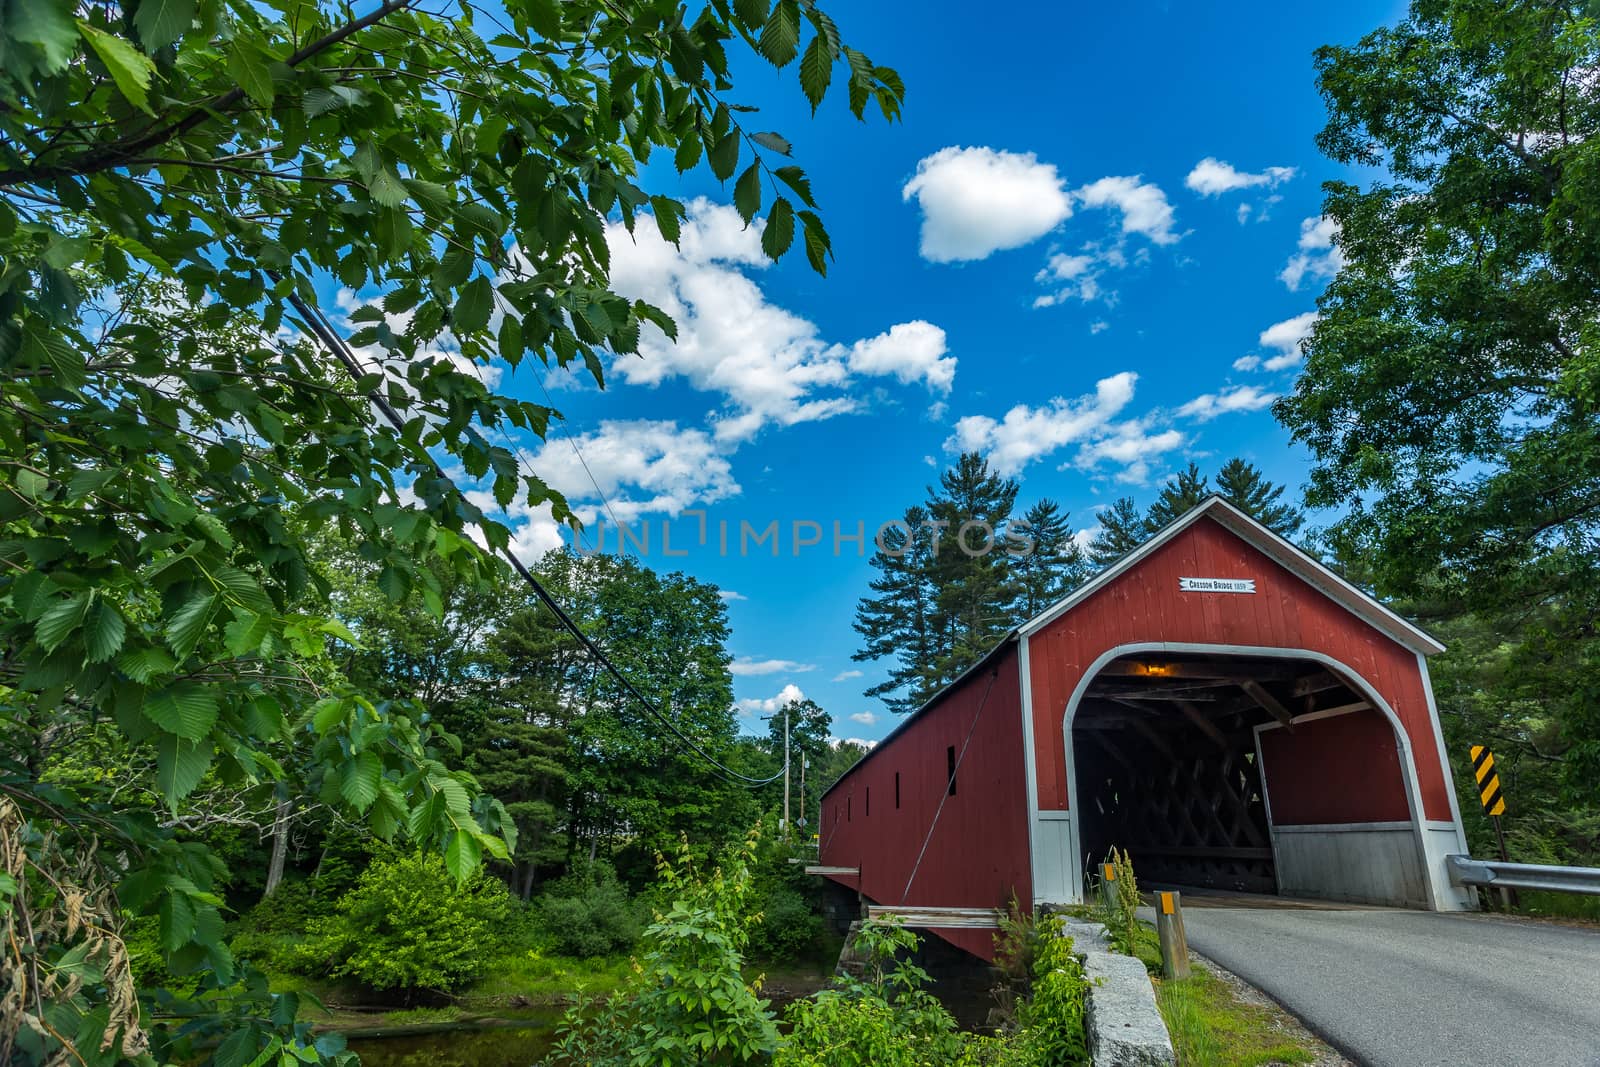 Sawyers Crossing Covered Bridge by adifferentbrian